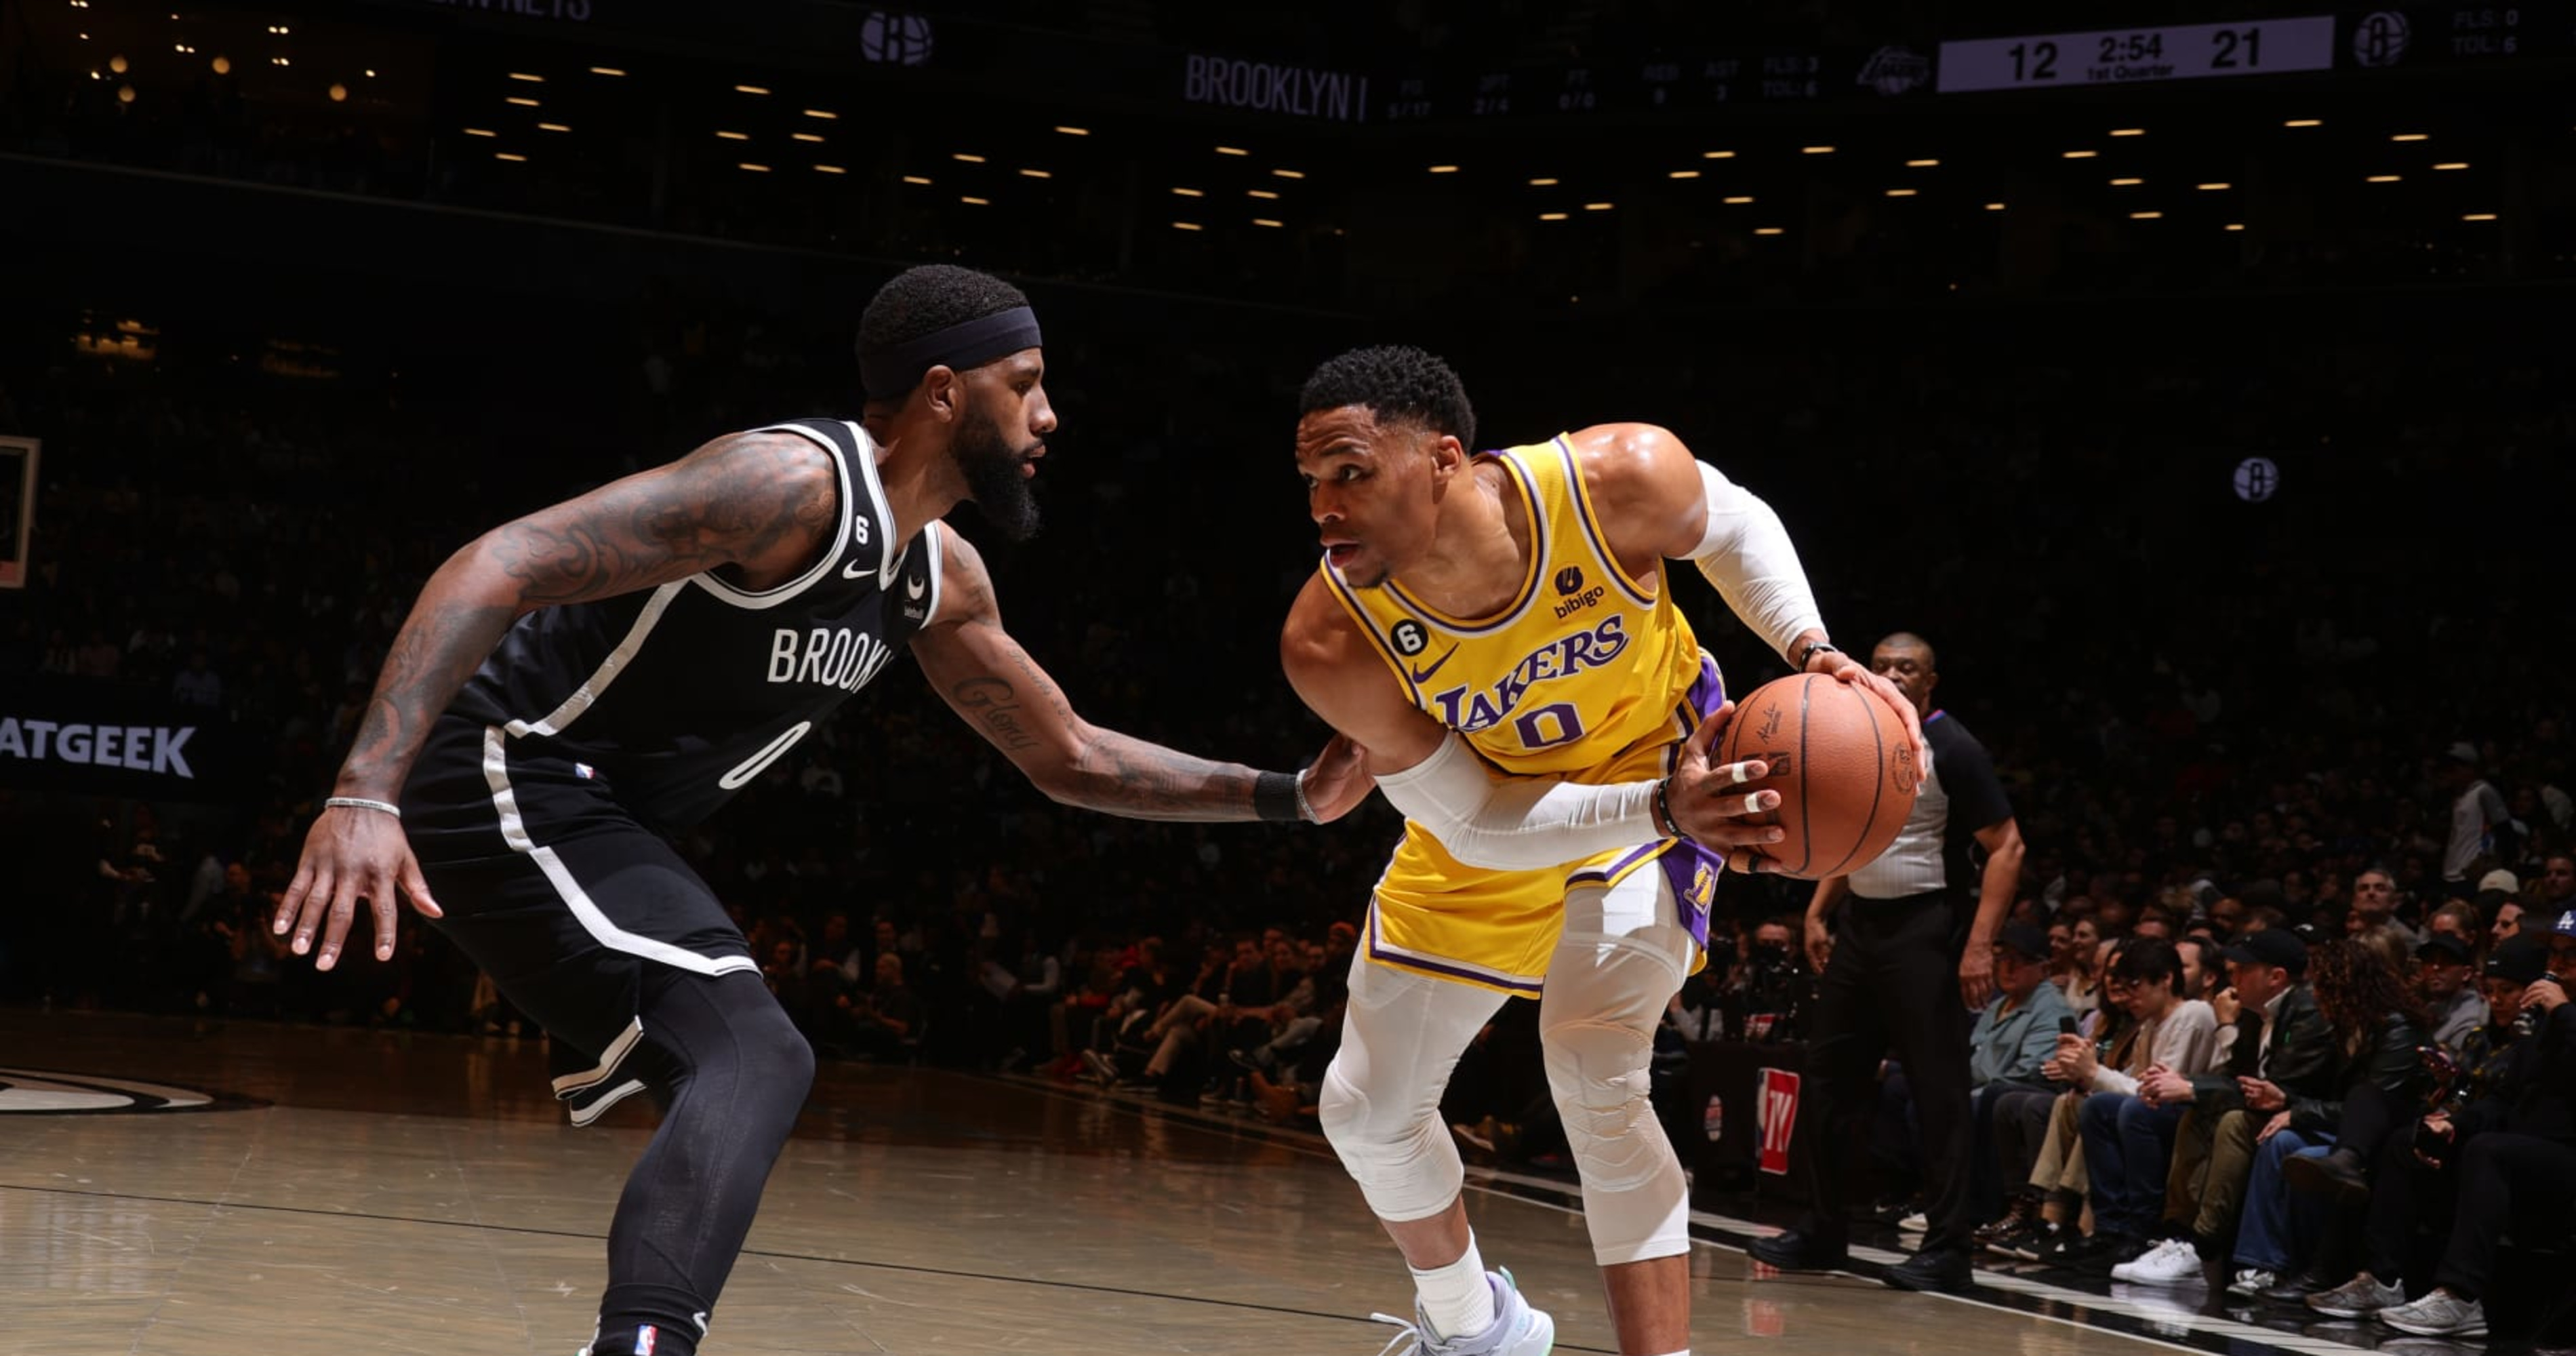 Kyrie Irving tossed as Nets suffer blowout loss to Lakers, 126-101 -  NetsDaily